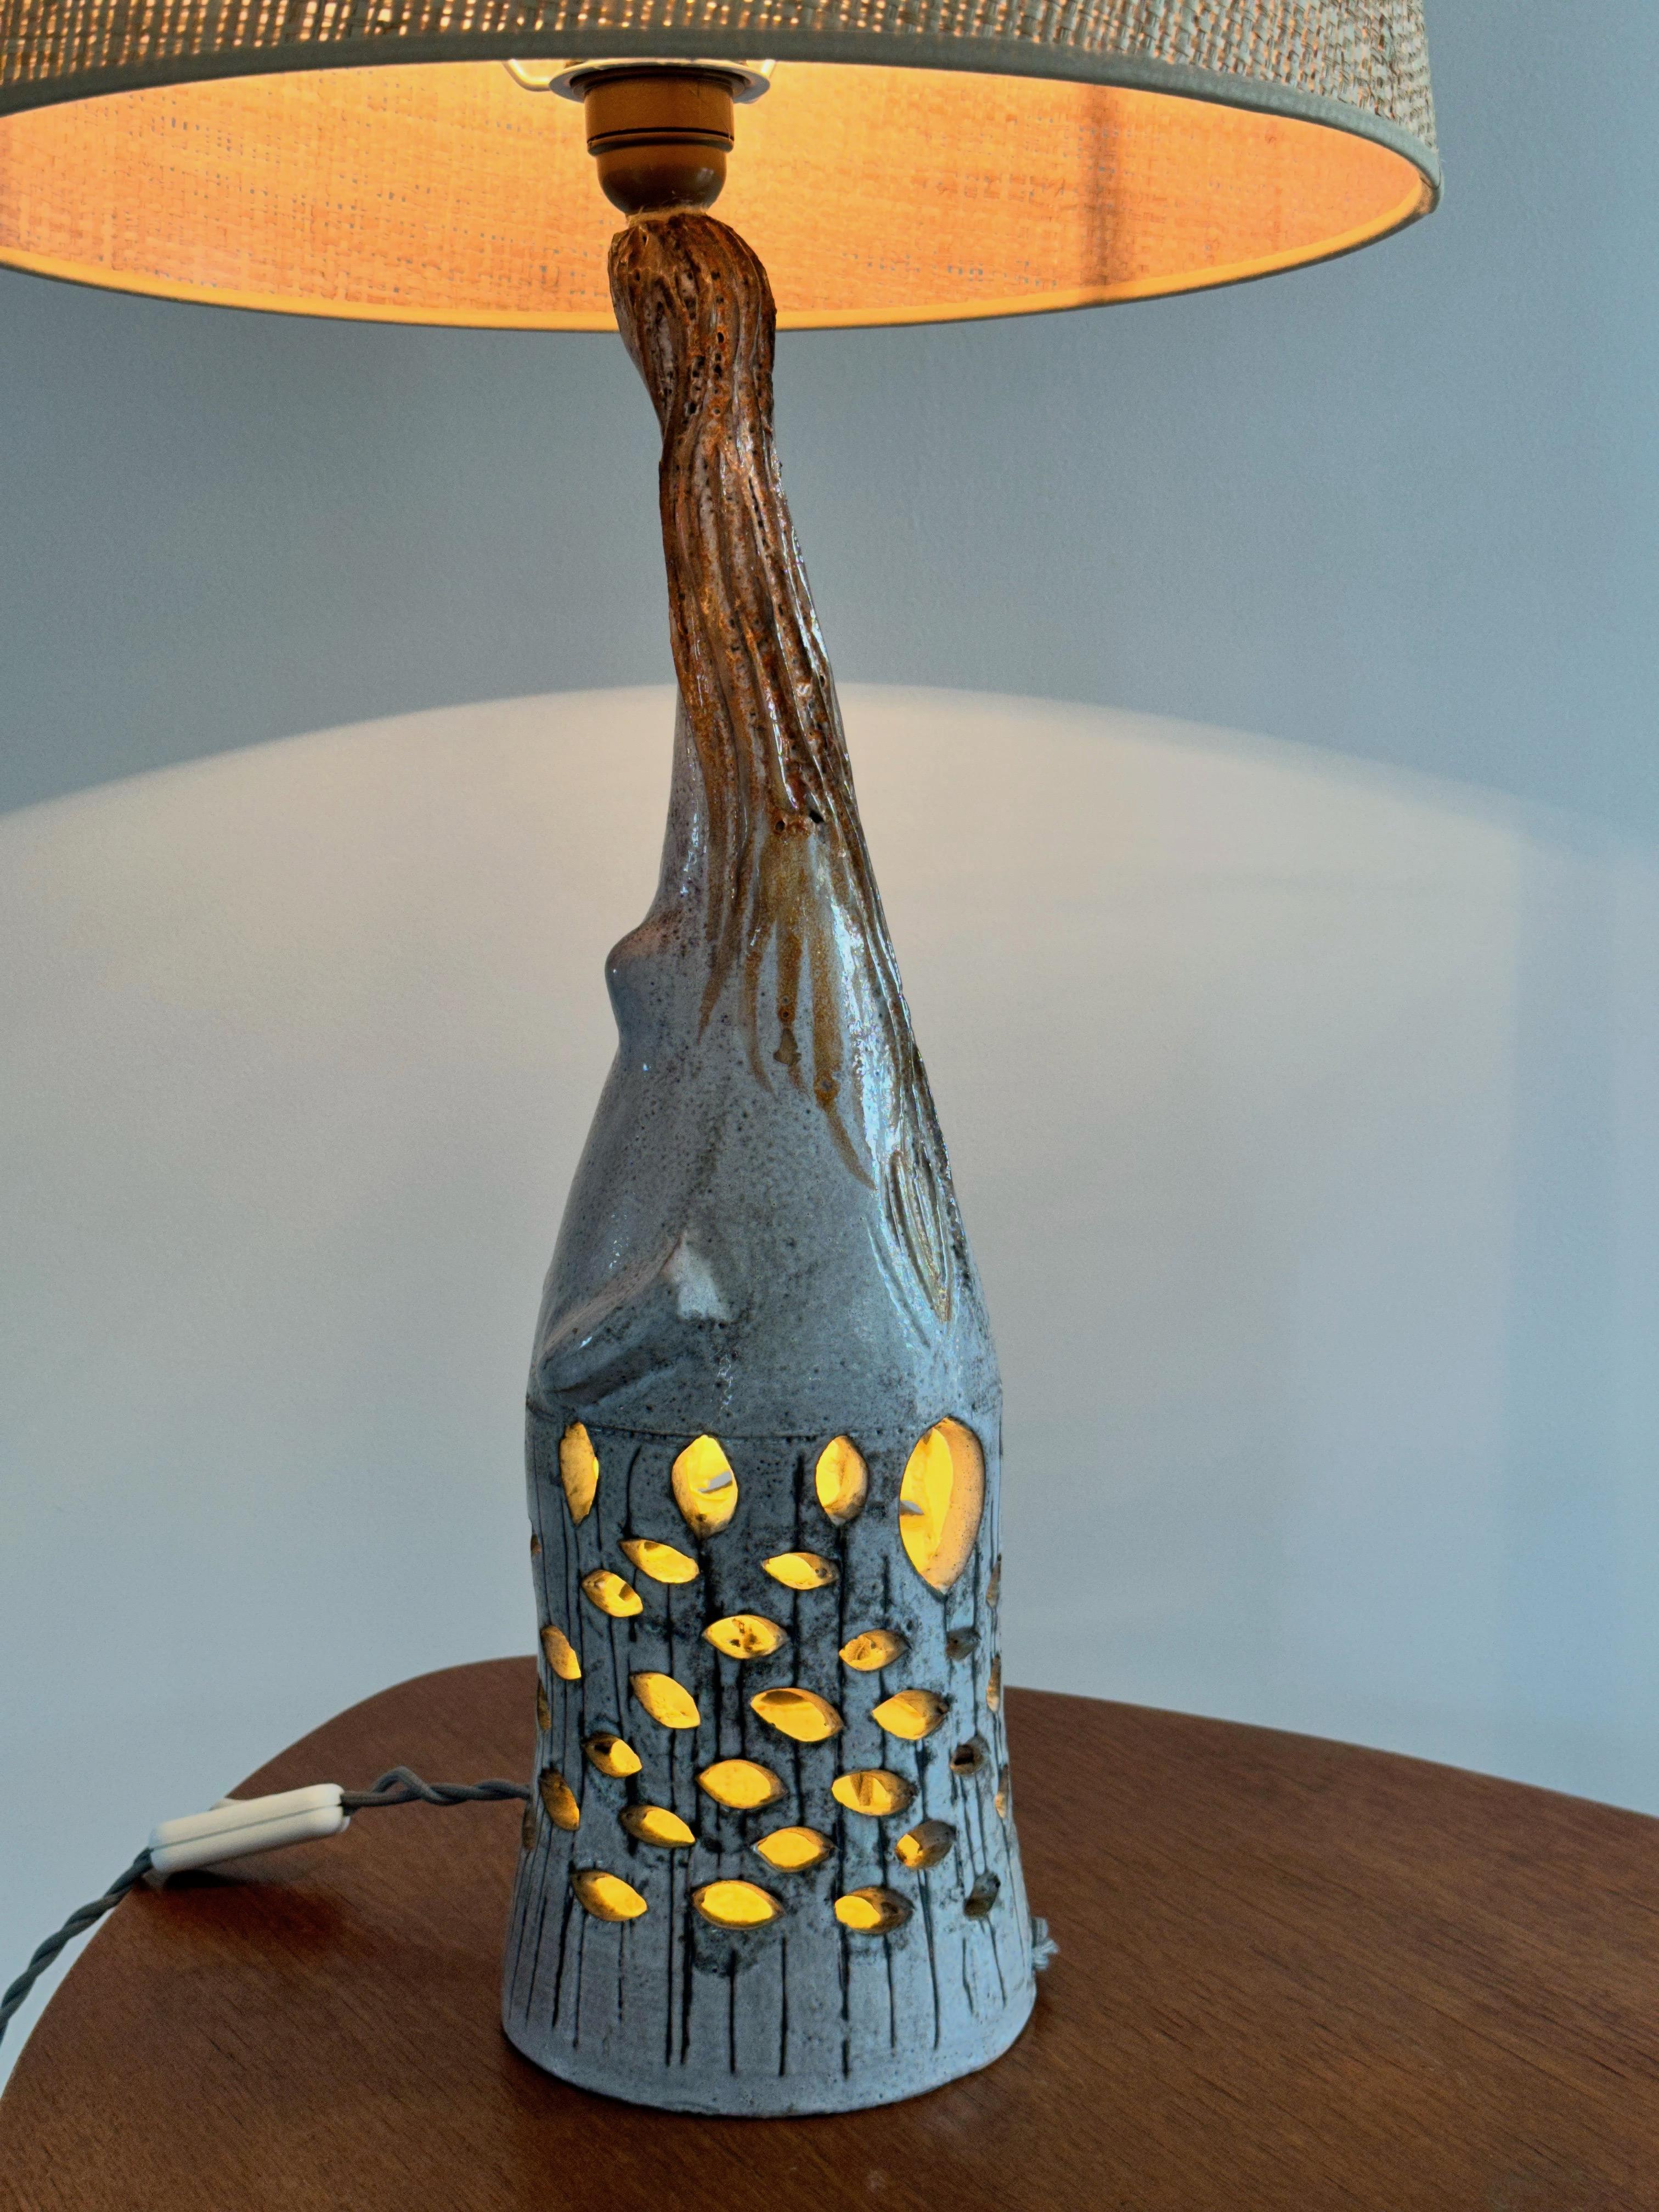 Hand-Carved Anthropomorphic Ceramic Lamp Maurice Camos, French Artist, Unique Work, 1960s For Sale